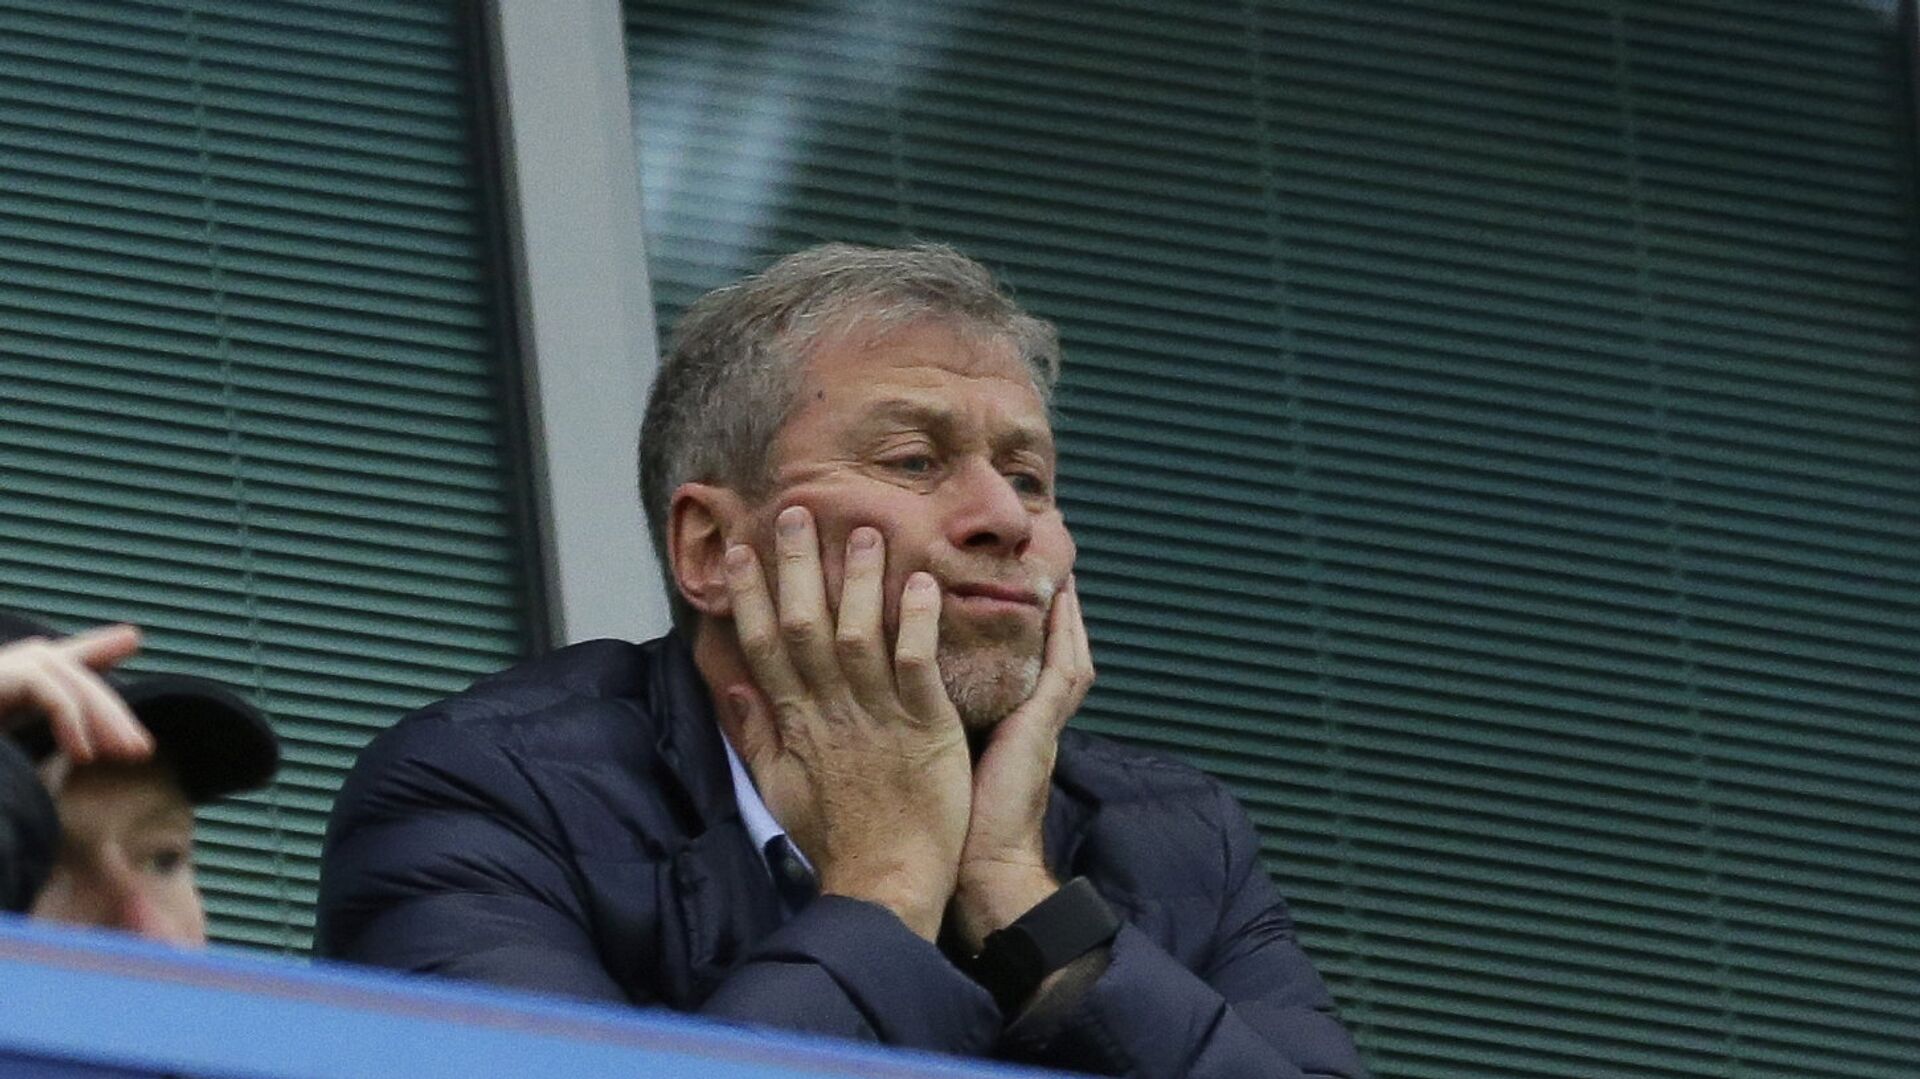 In this file photo dated Saturday, Dec. 19, 2015, Chelsea soccer club owner Roman Abramovich sits in his box before the English Premier League soccer match between Chelsea and Sunderland at Stamford Bridge stadium in London. Russian billionaire Roman Abramovich has received Israeli citizenship after his British visa has not been renewed. An Israeli Immigration and Absorption Ministry official says the Chelsea soccer club owner arrived in Israel Monday and was granted citizenship in accordance with an Israeli law granting that right to people of Jewish descent - اسپوتنیک افغانستان  , 1920, 06.05.2022